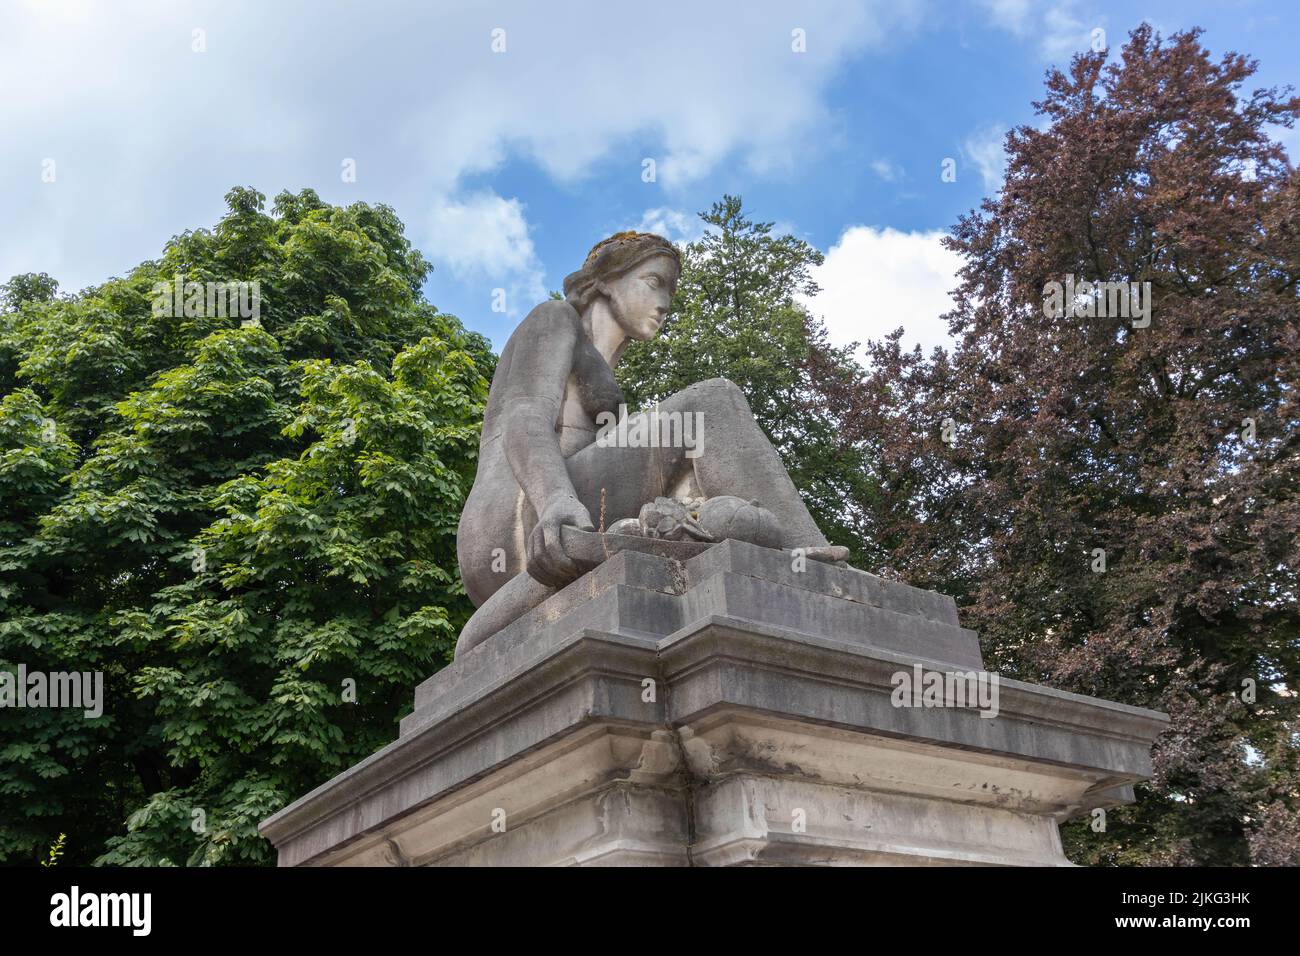 A statue of a sitting woman decorating the fence of the Cinquantenaire Park, Brussels, Belgium Stock Photo